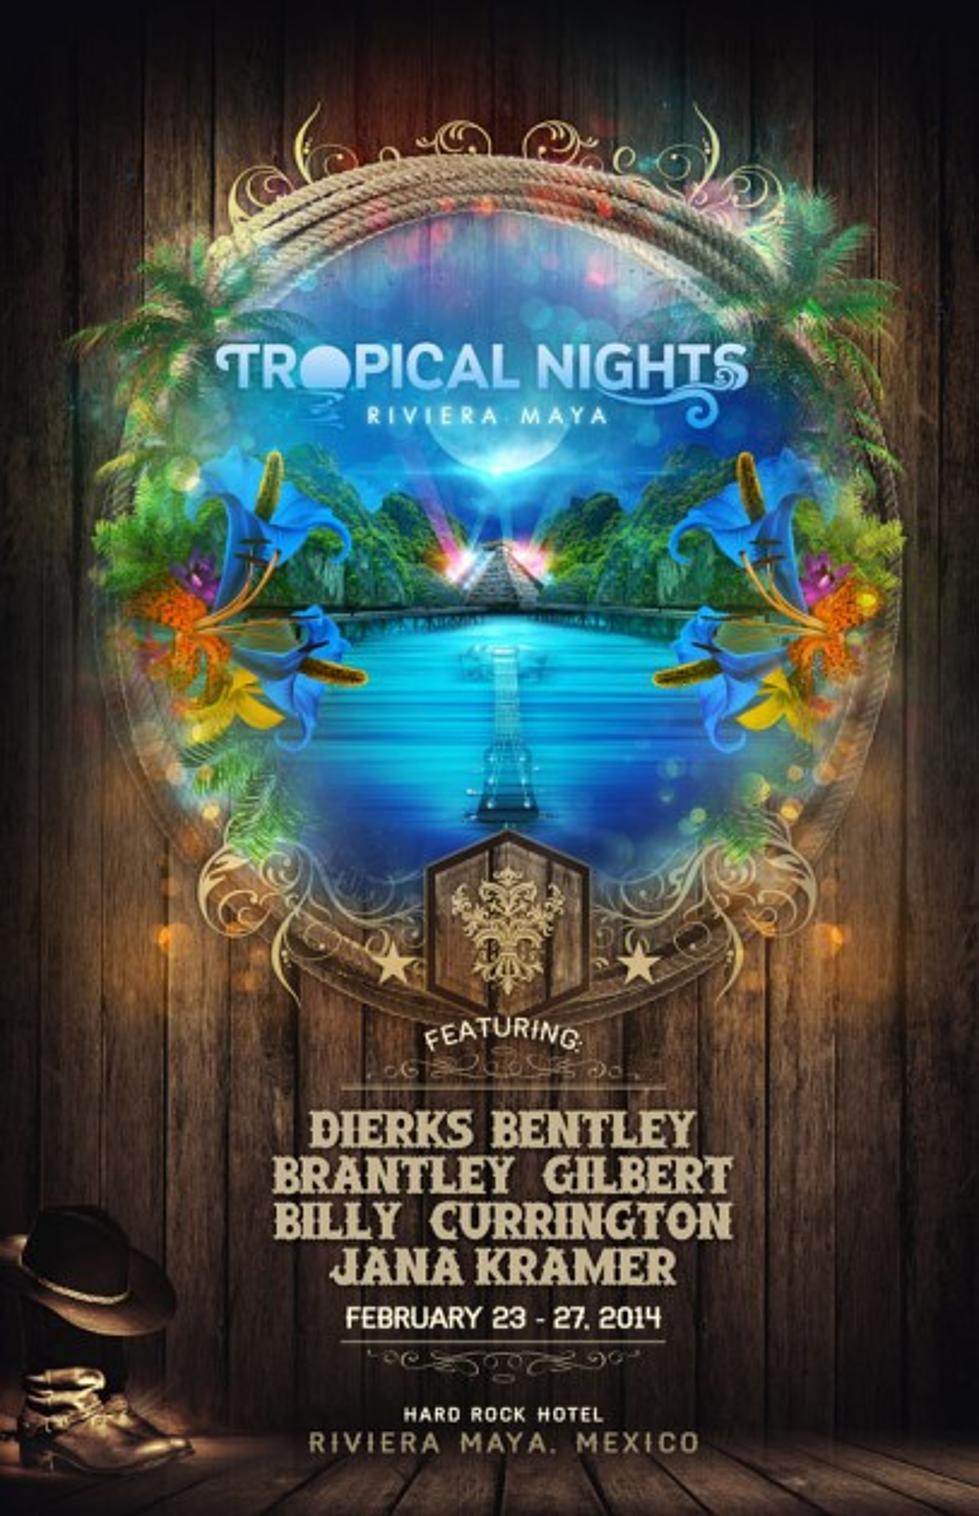 Songs I&#8217;d Want to Hear at Tropical Nights: Boots in the Sand